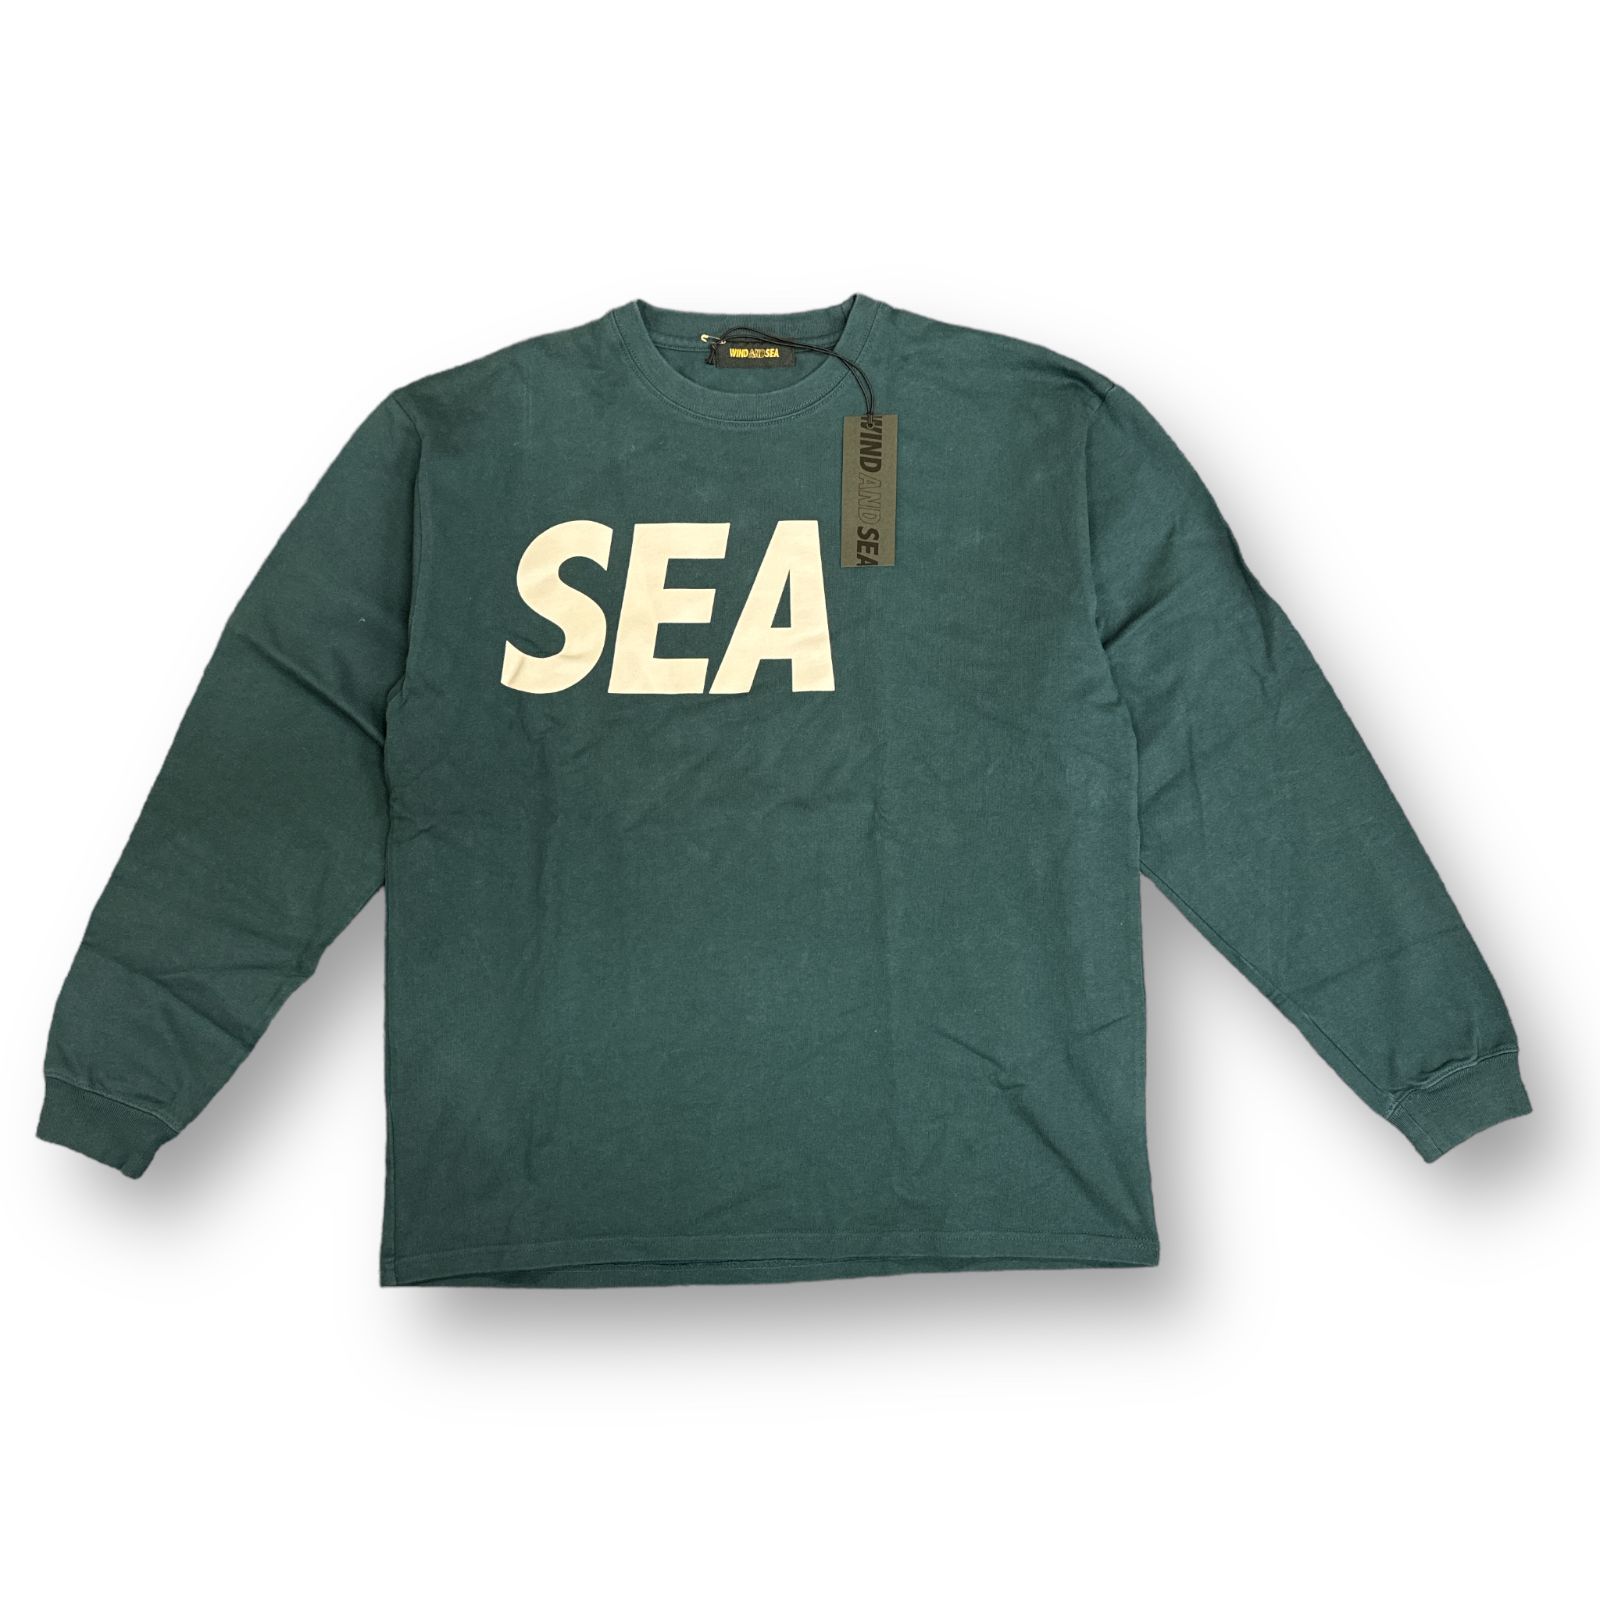 WIND AND SEA 22SS Sea L/S Tee WDS-SEA-22S-01 プリント カットソー T ...